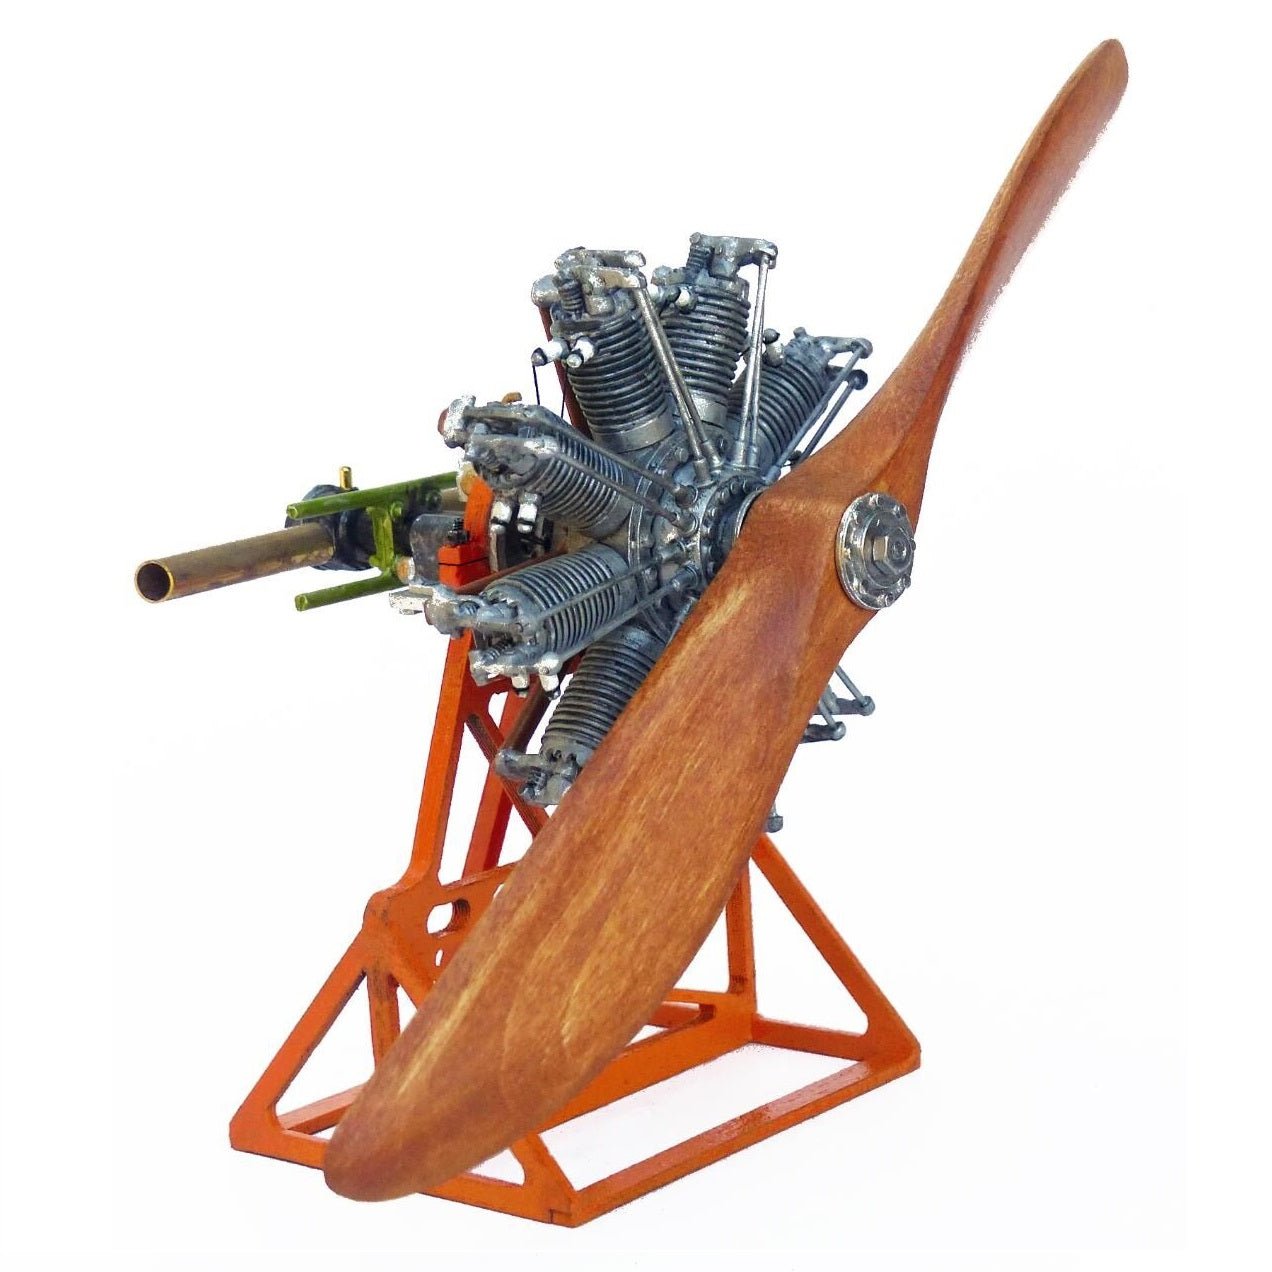 Model Airways Clerget 9B WWI Rotary Aircraft Engine Wood/Metal Kit, 1:16 Scale - Micro - Mark Scale Model Kits